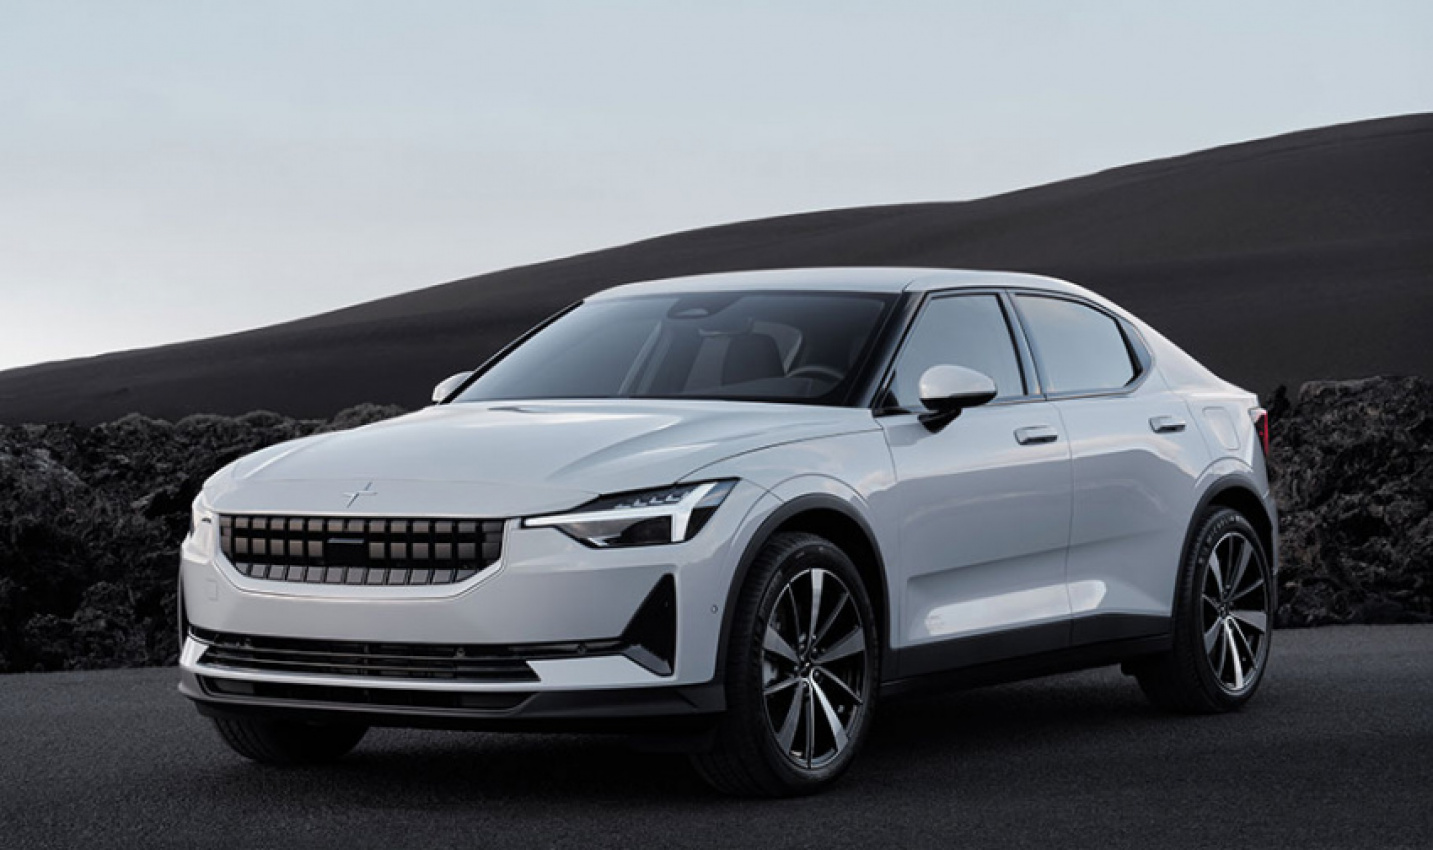 autos, cars, polestar, android, android, polestar 2 comes with a wide choice of equipment options. check details here!